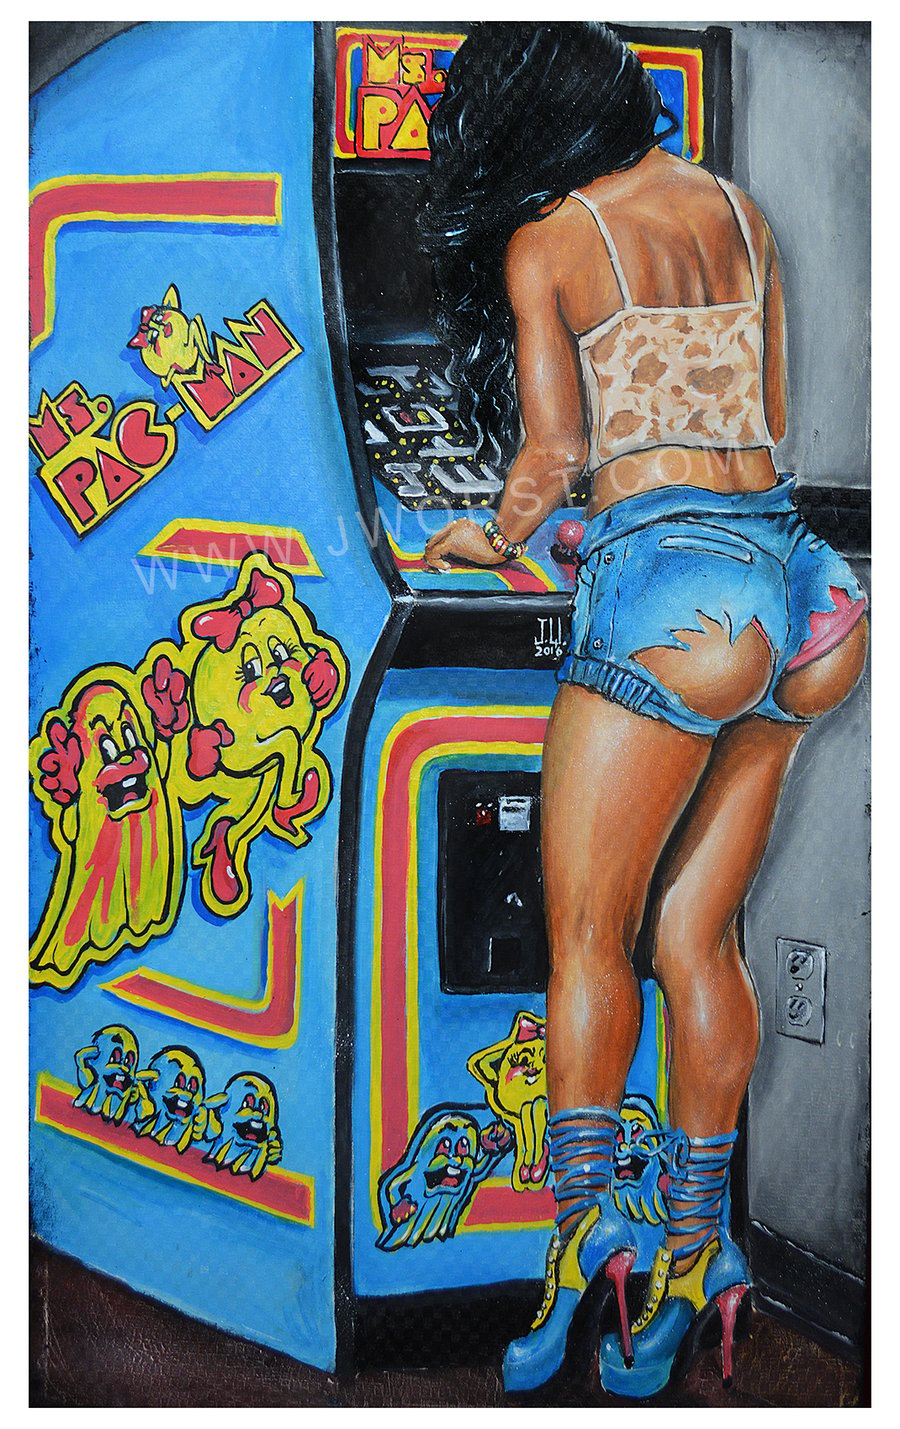 Image of JEREMY WORST Ms Pacman Arcade Sexy girl Artwork Fine Art Print pin up Adult erotic booty shorts